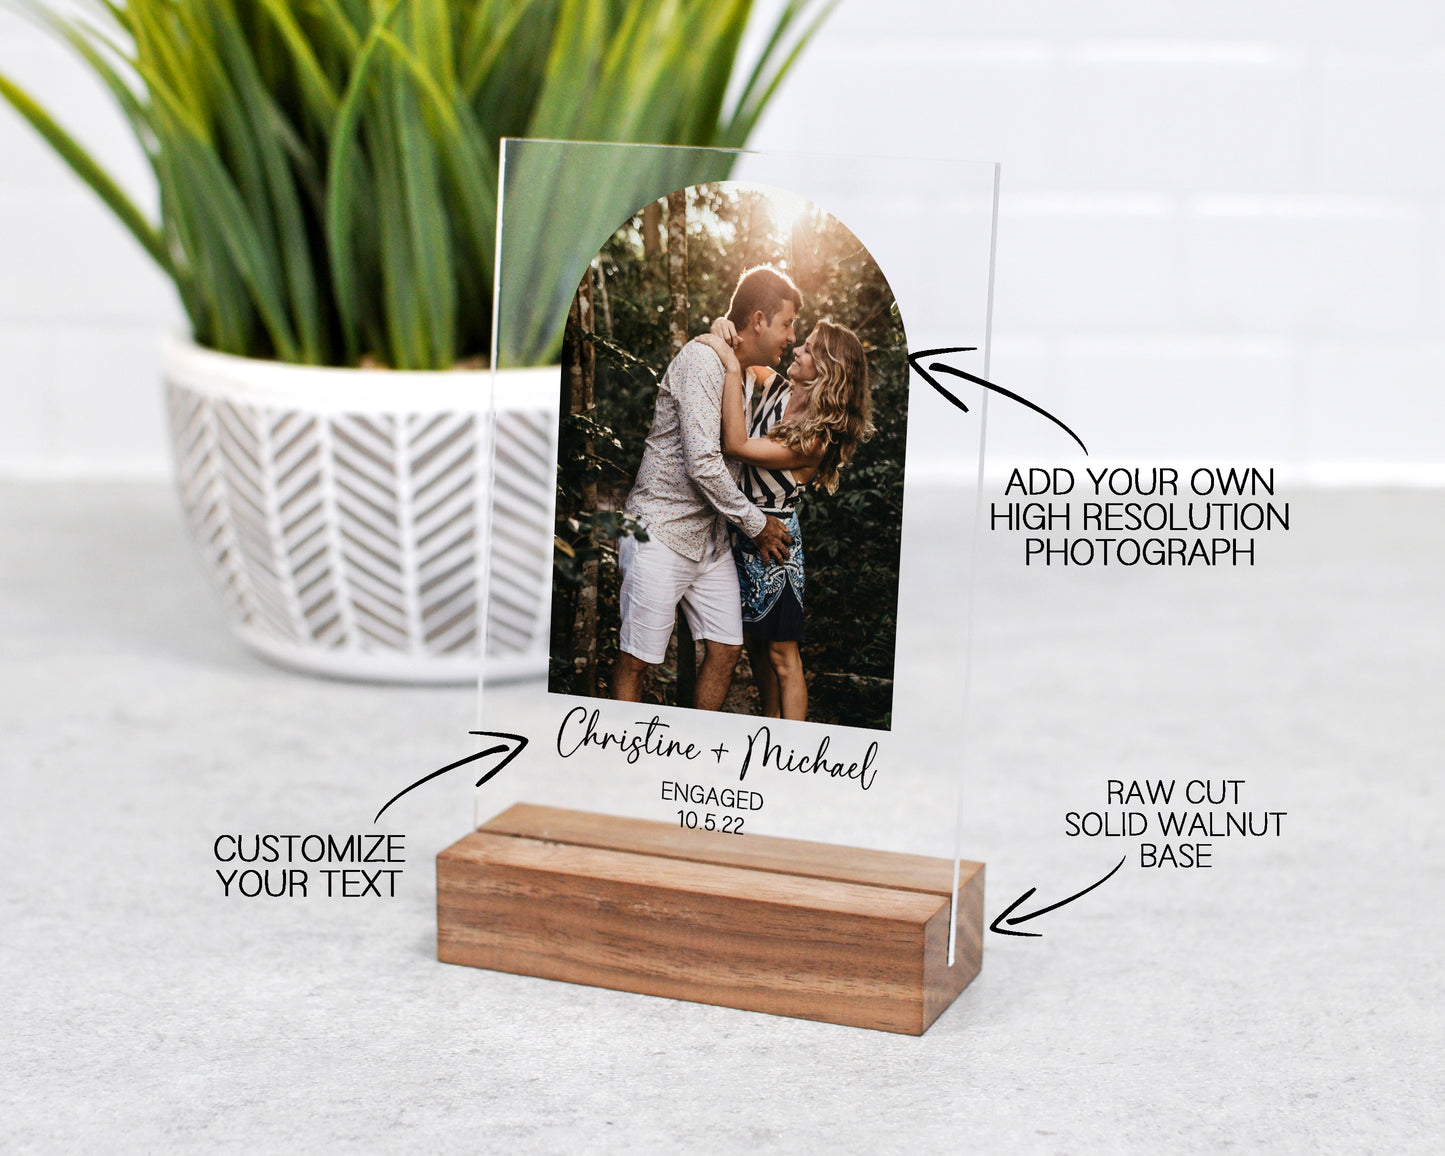 add your own high resolution photograph, raw walnut base, customize your text